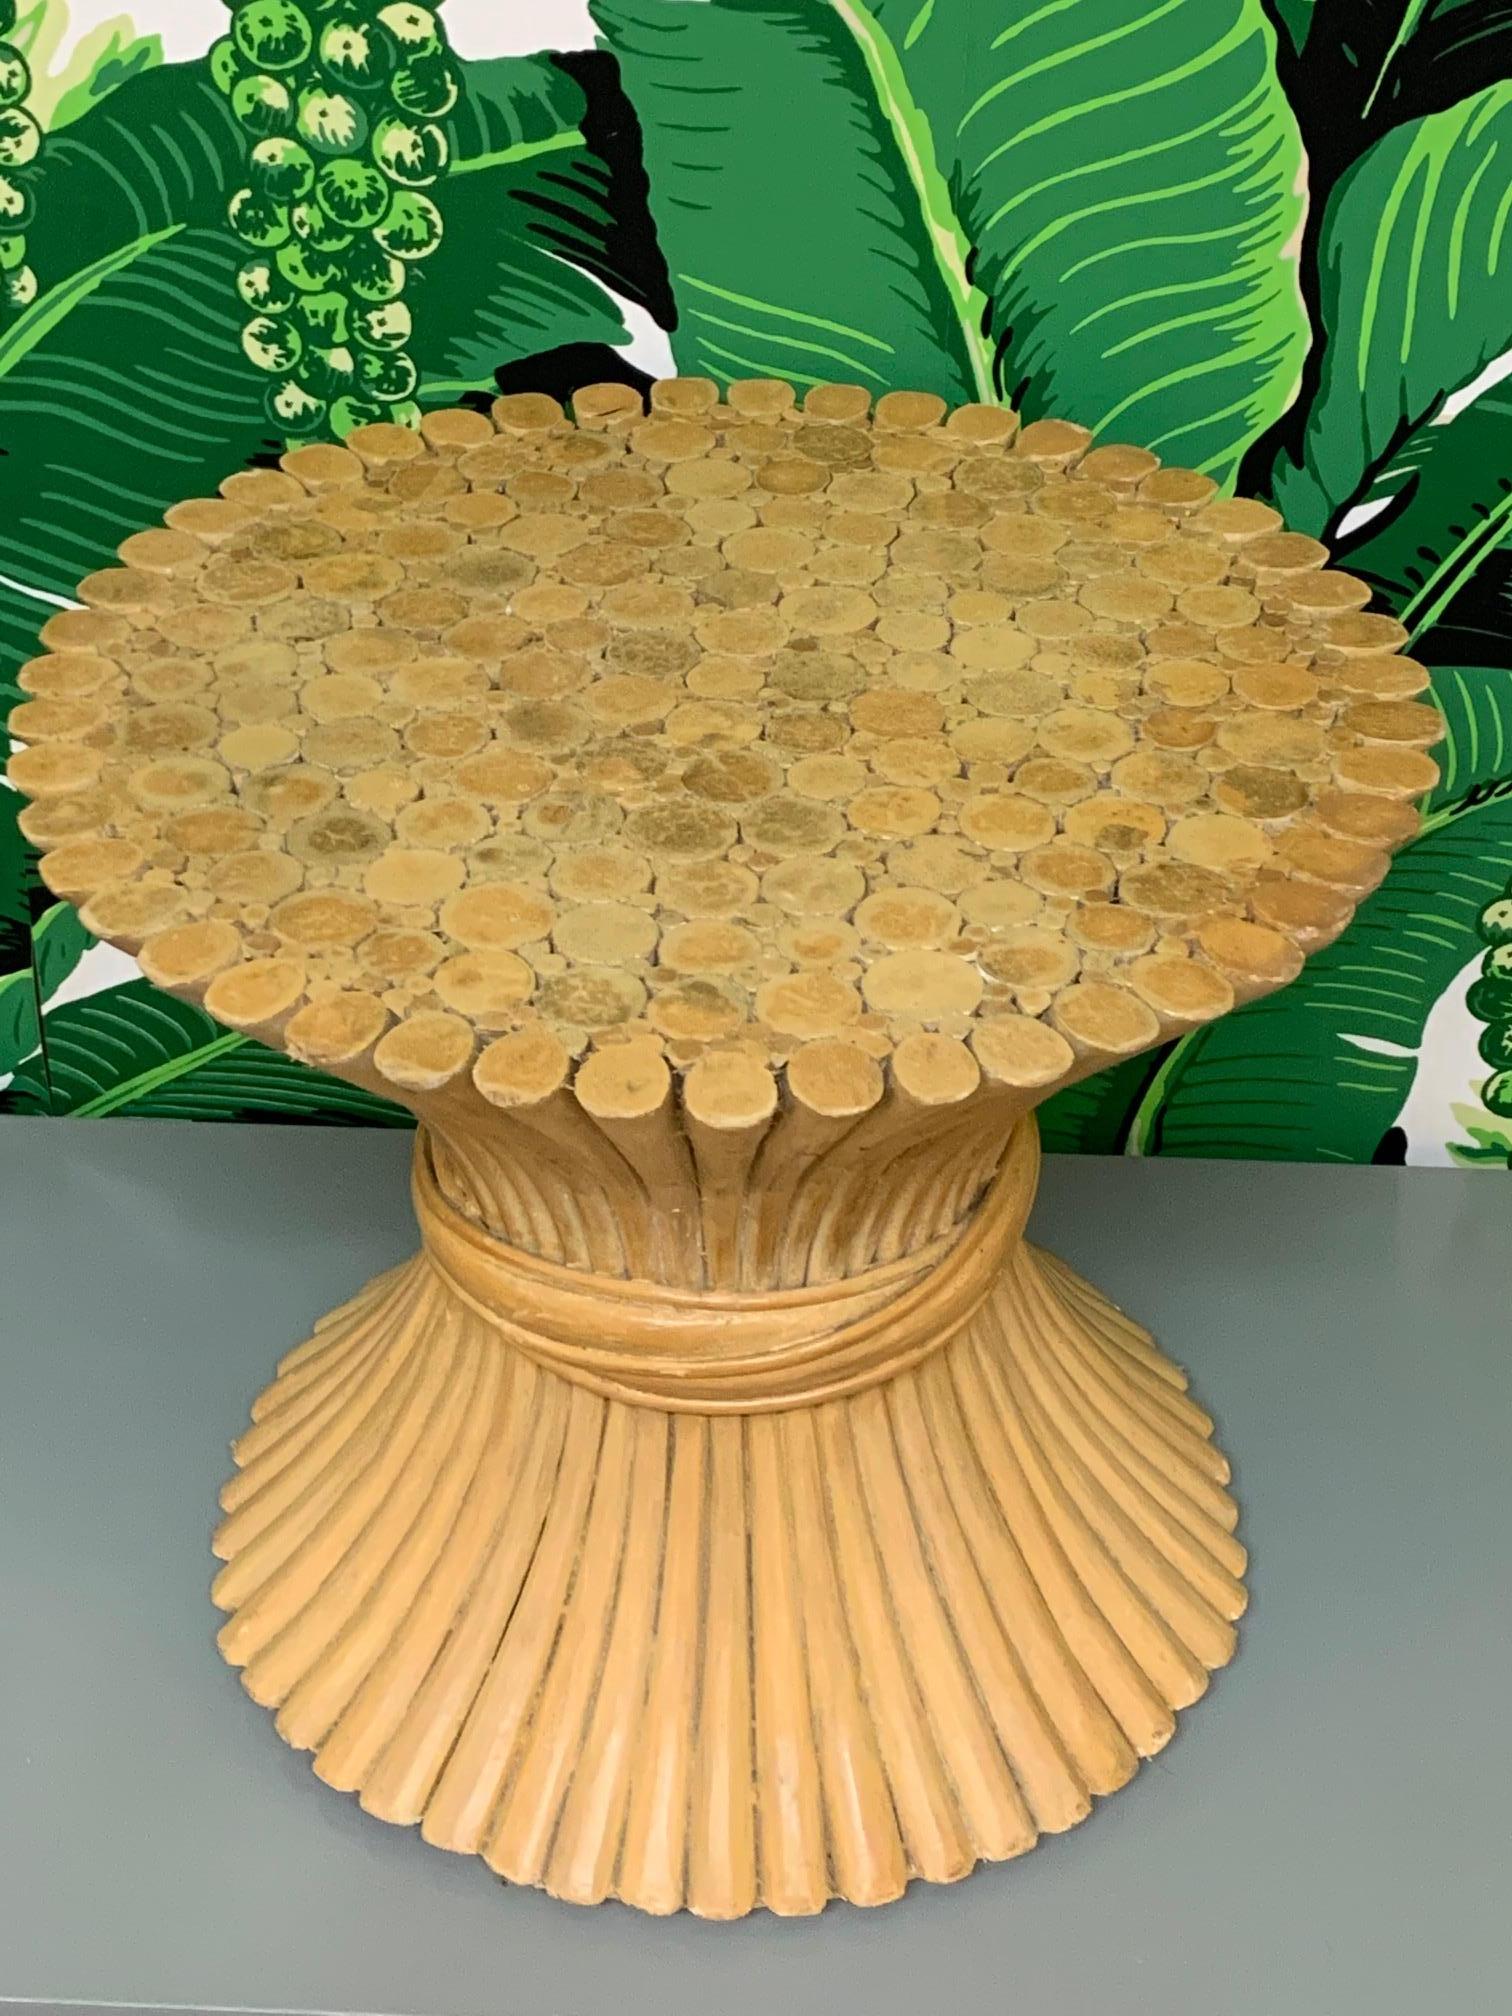 Sheaf of wheat rattan footstool in the style of McGuire. Very good condition with minor imperfections consistent with age.